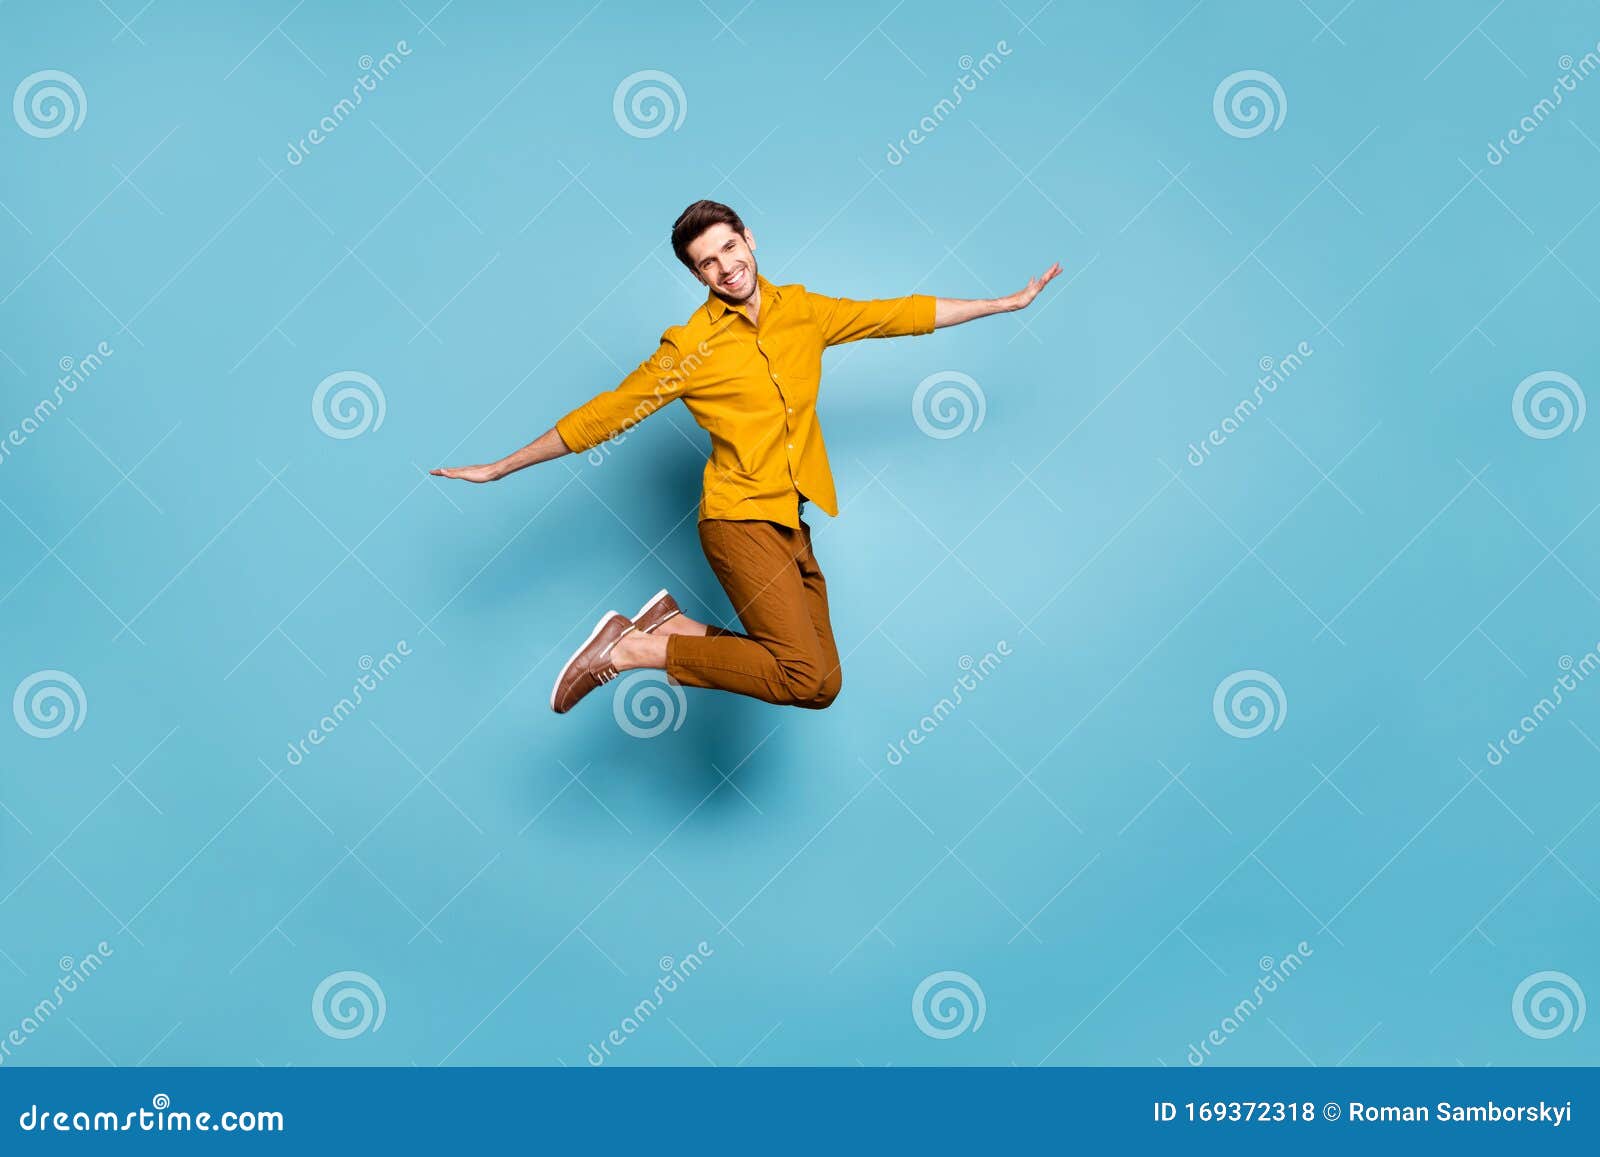 Full Length Photo of Crazy Guy Jumping High Holding Hands Spread by ...